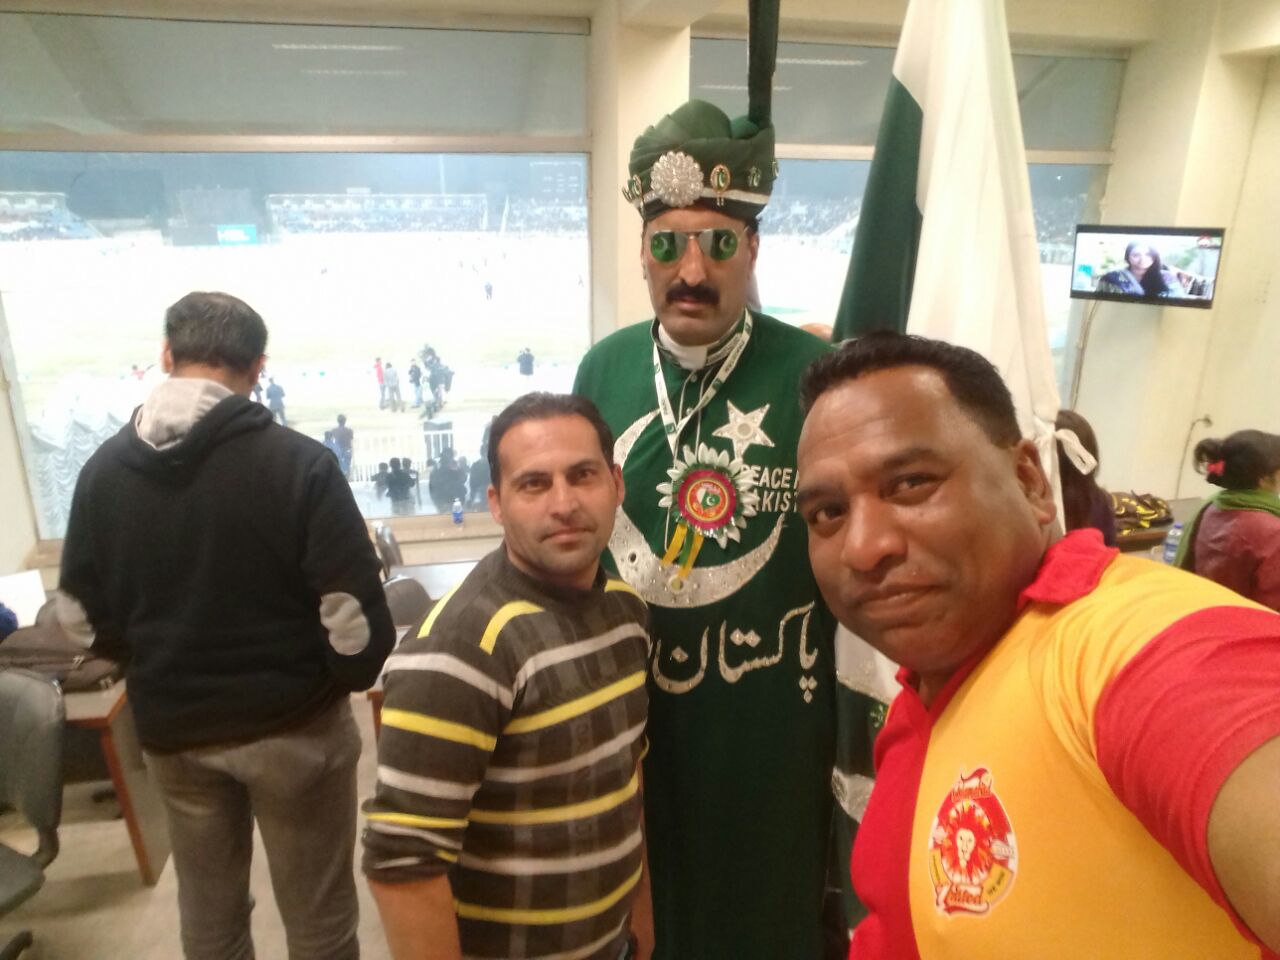 SHOW, OFF, MATCH, OF, PSL, AT, RAWALPINDI, CRICKET, STADIUM, BETWEEN, ISLAMABAD UNITED, AND, QUETTA GLADIATORS, AFTER, CHACHA CRICKET, AND, CHACHA T20, NEW, CRICKET, FAN, BABU PAKISTANI, CAME, TO, SEE, FOR, THE, FIRST, TIME, DETAILED, INTERVIEW, BY, ASGHAR ALI MUBARAK, FOR, YESRUDU, NEWS